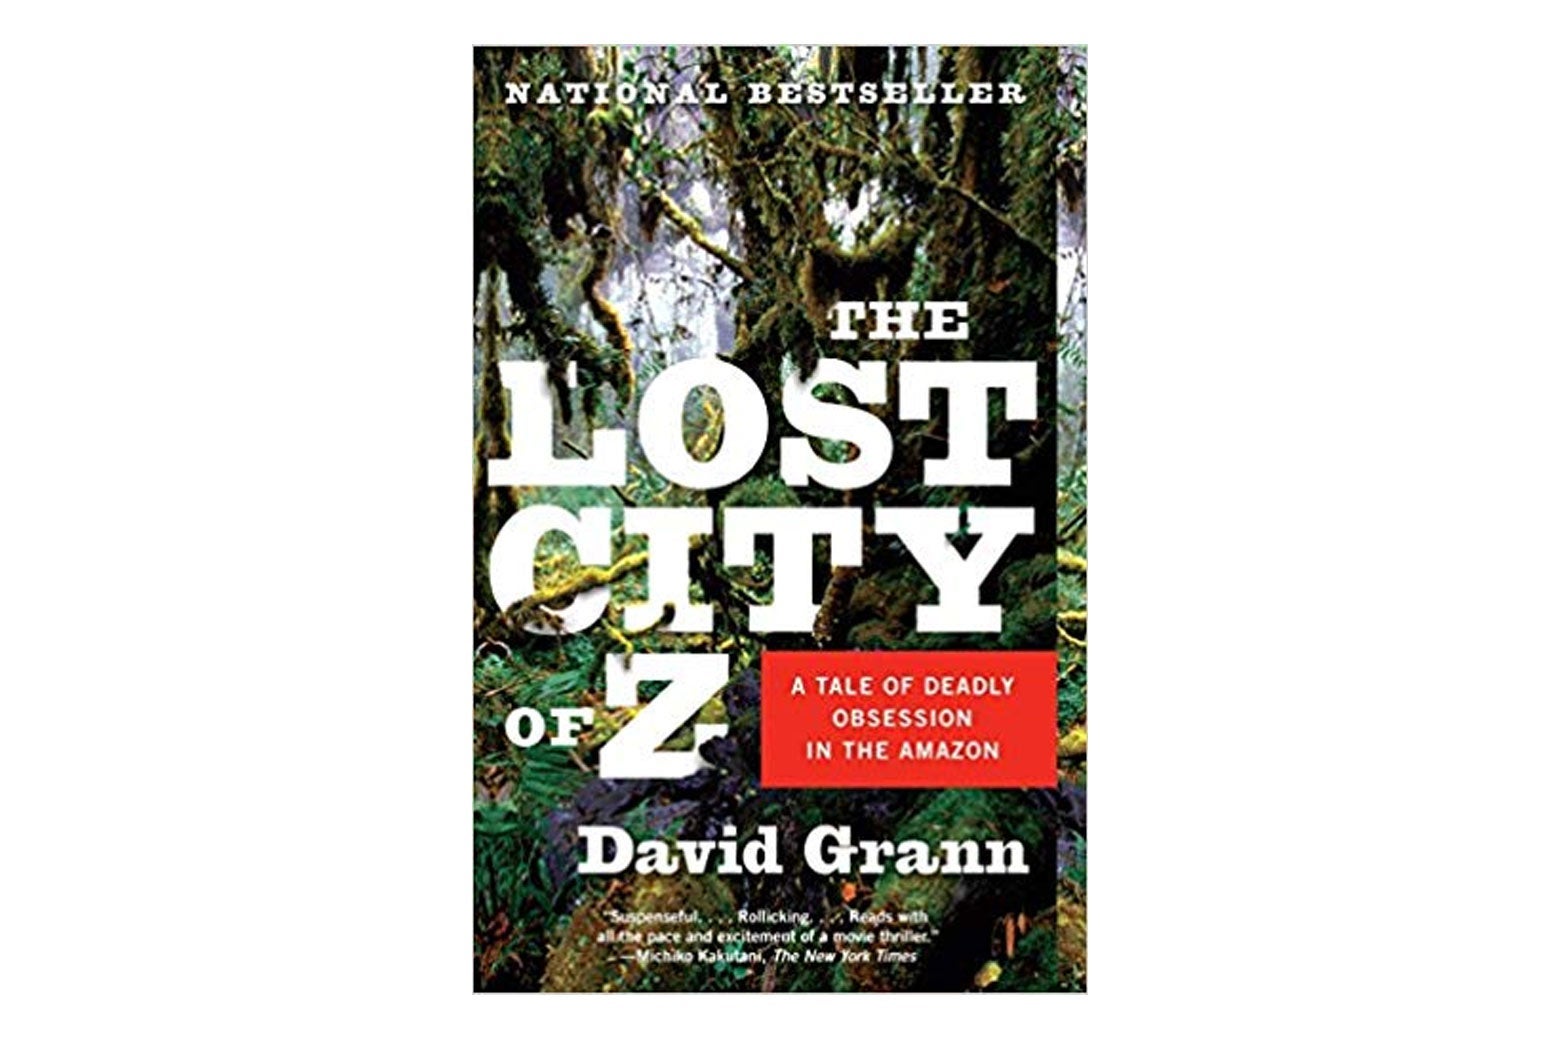 The Lost City of Z book cover.